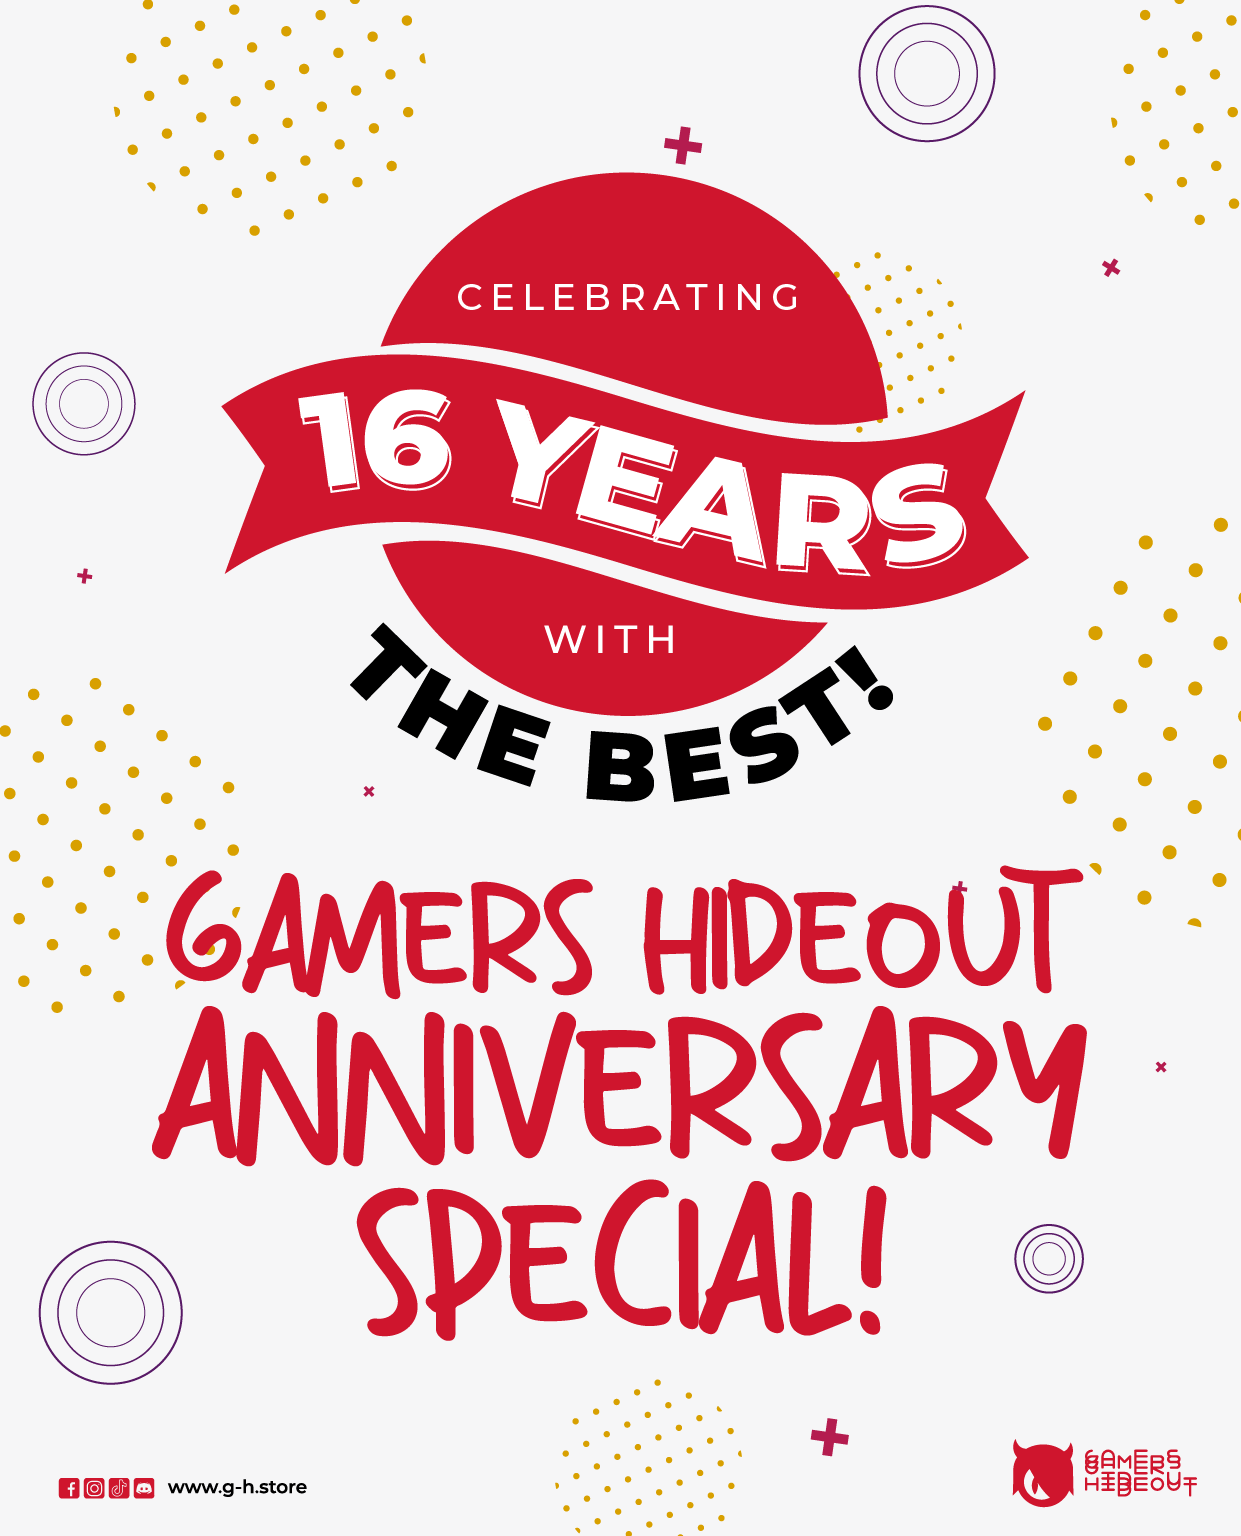 gamers' hideout anniversary